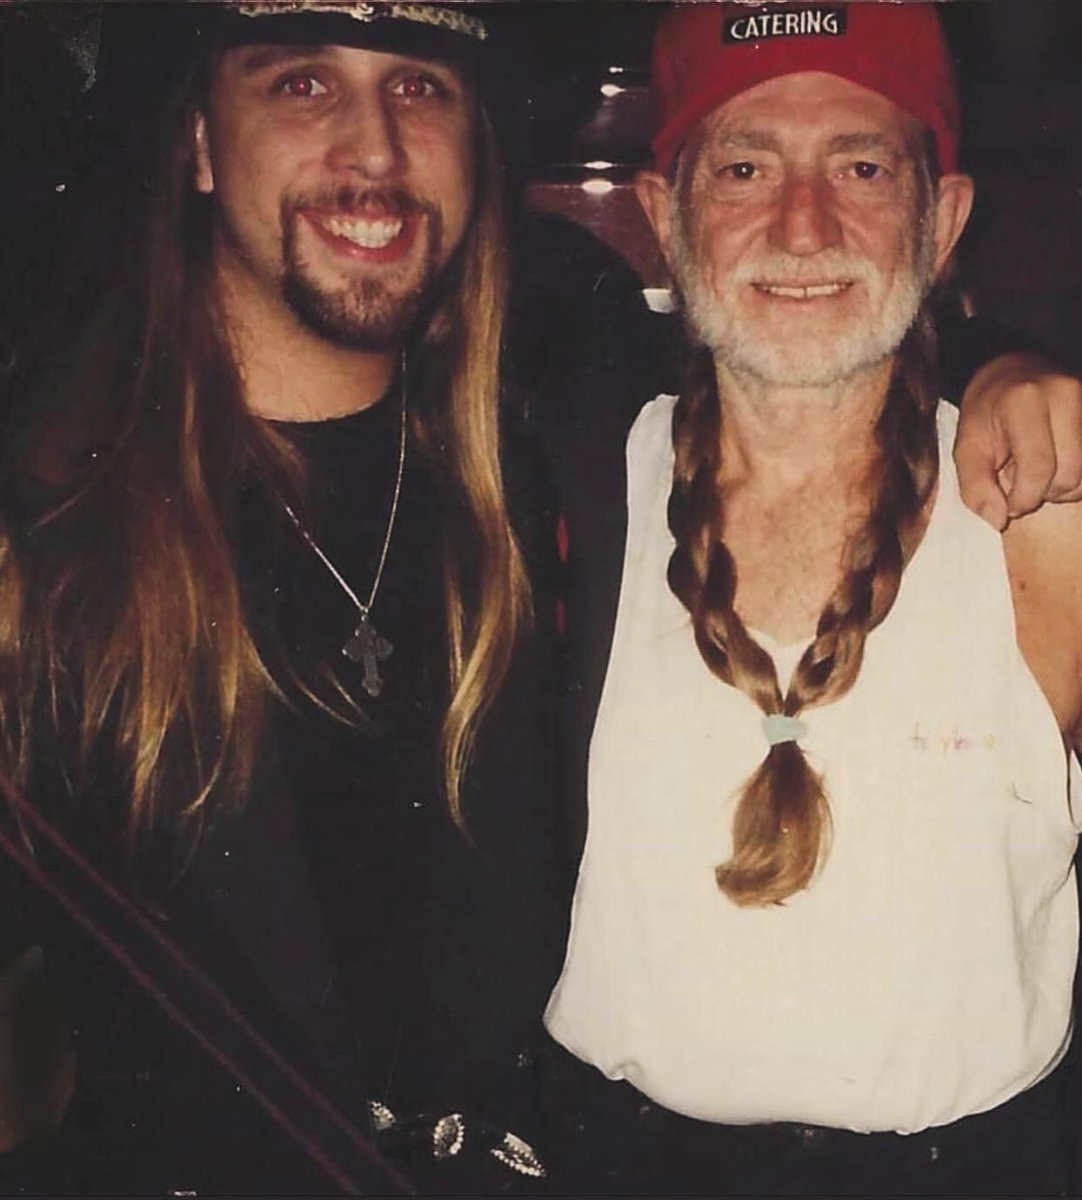 #ThowbackThursday #OnTheRoadAgain with @WillieNelson Owensboro, Kentucky Expo 1996! #OutlawCountry #WillieNelsonAndFamily